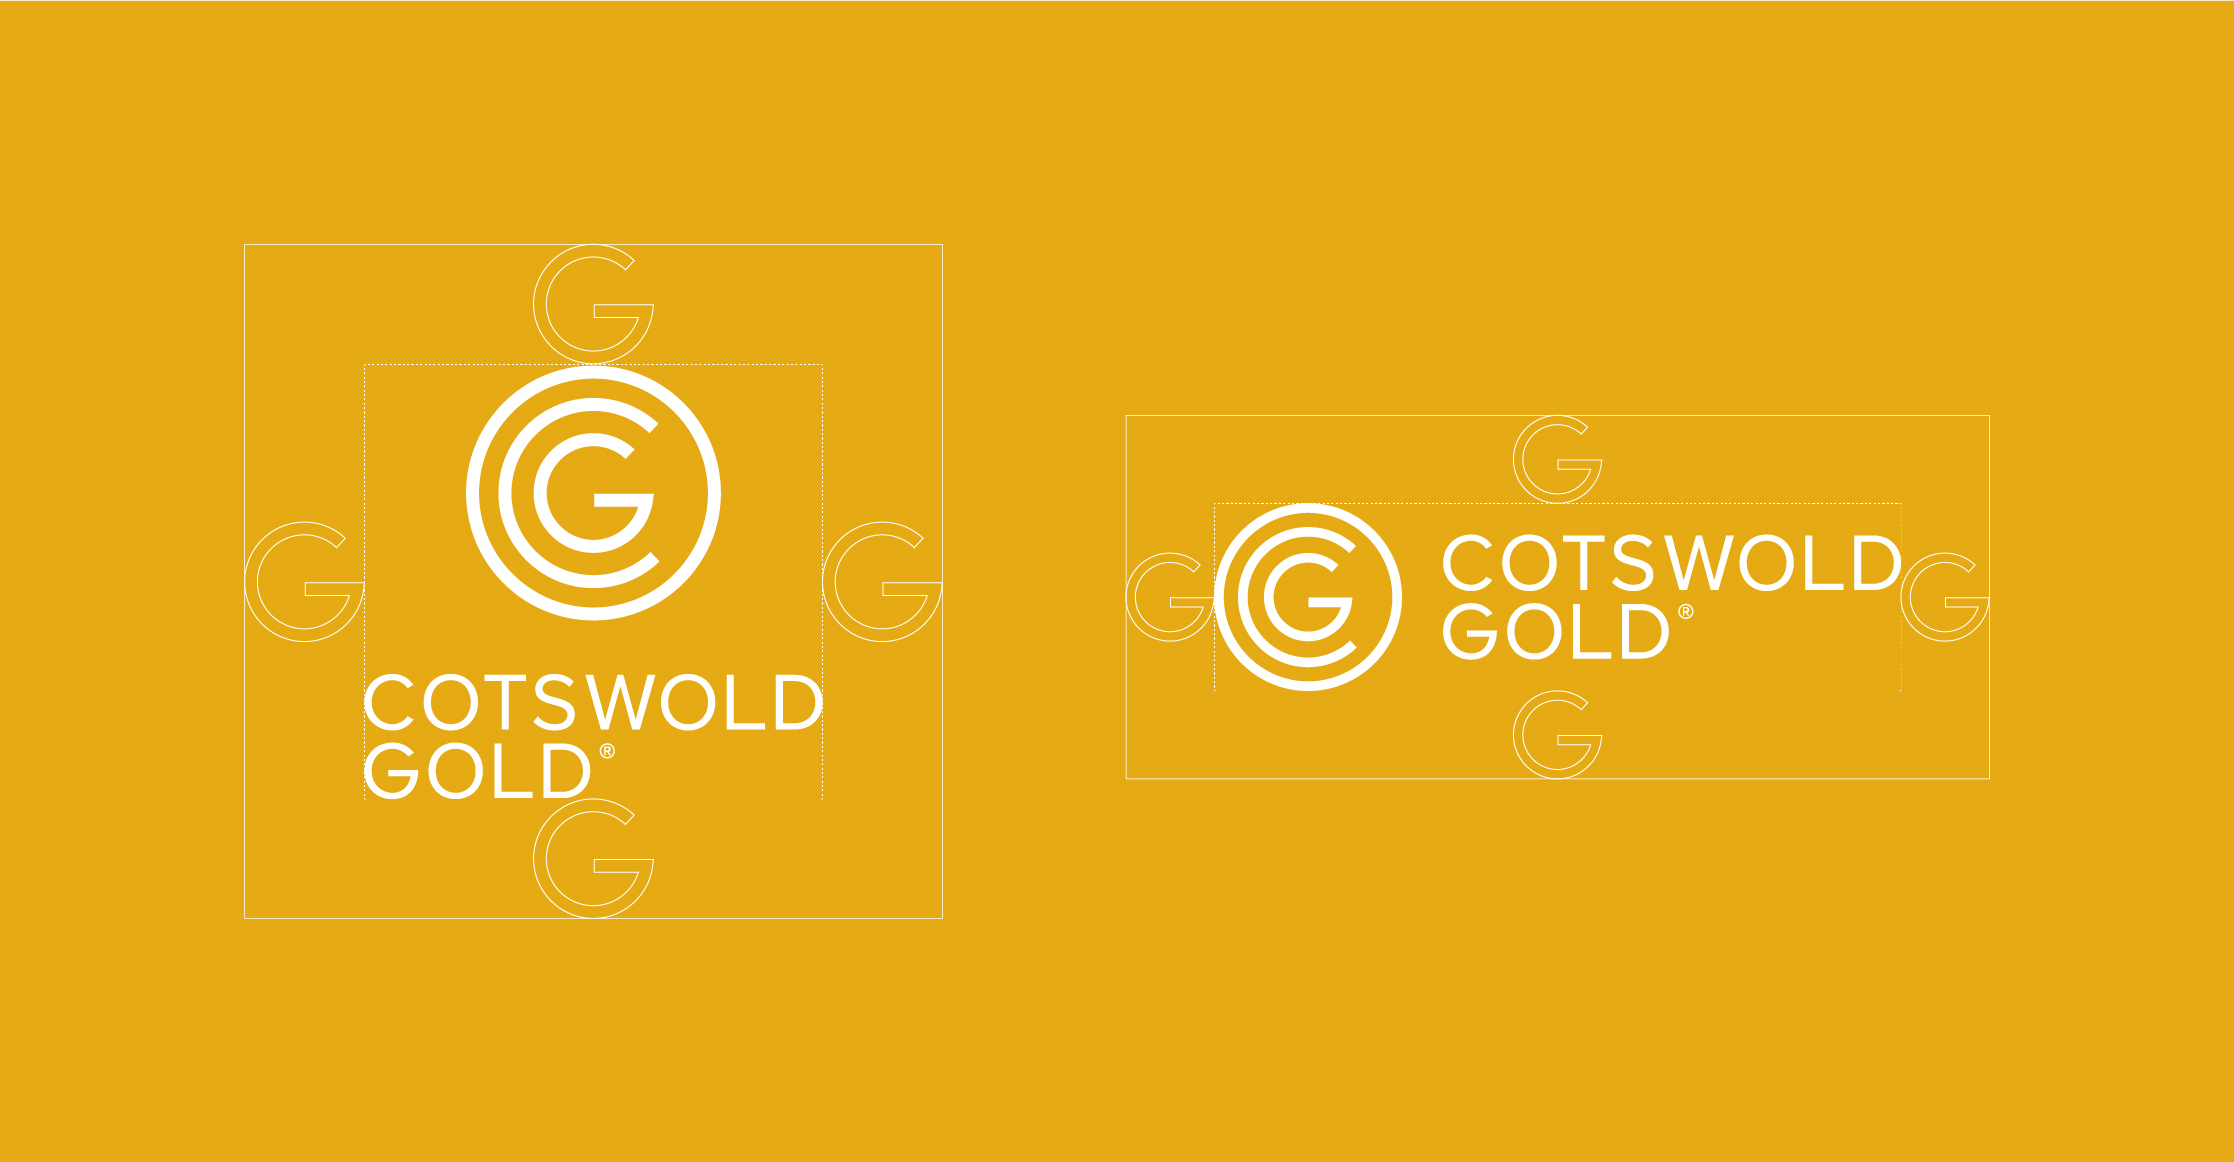 Cotswold Gold Branding Elements